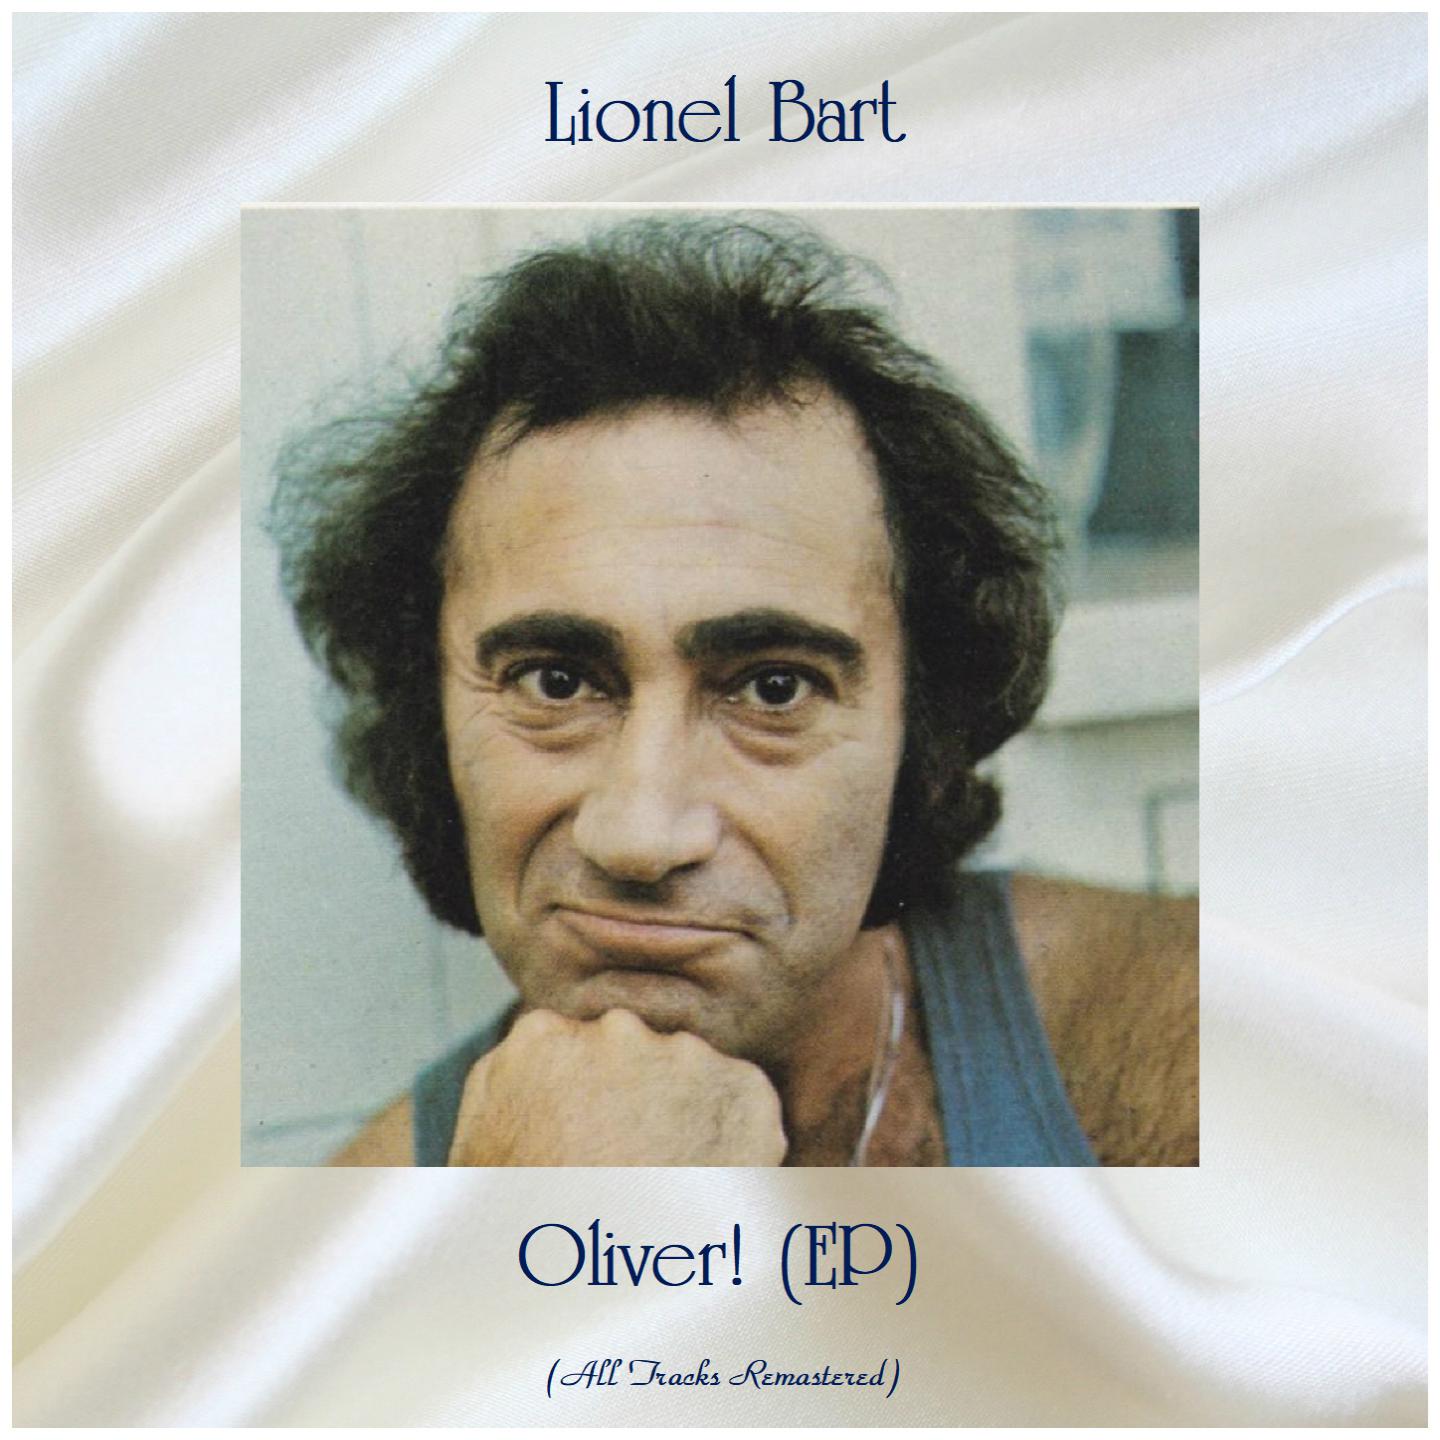 Lionel Bart - As Long as He Needs Me (Reprise) (Remastered 2016)